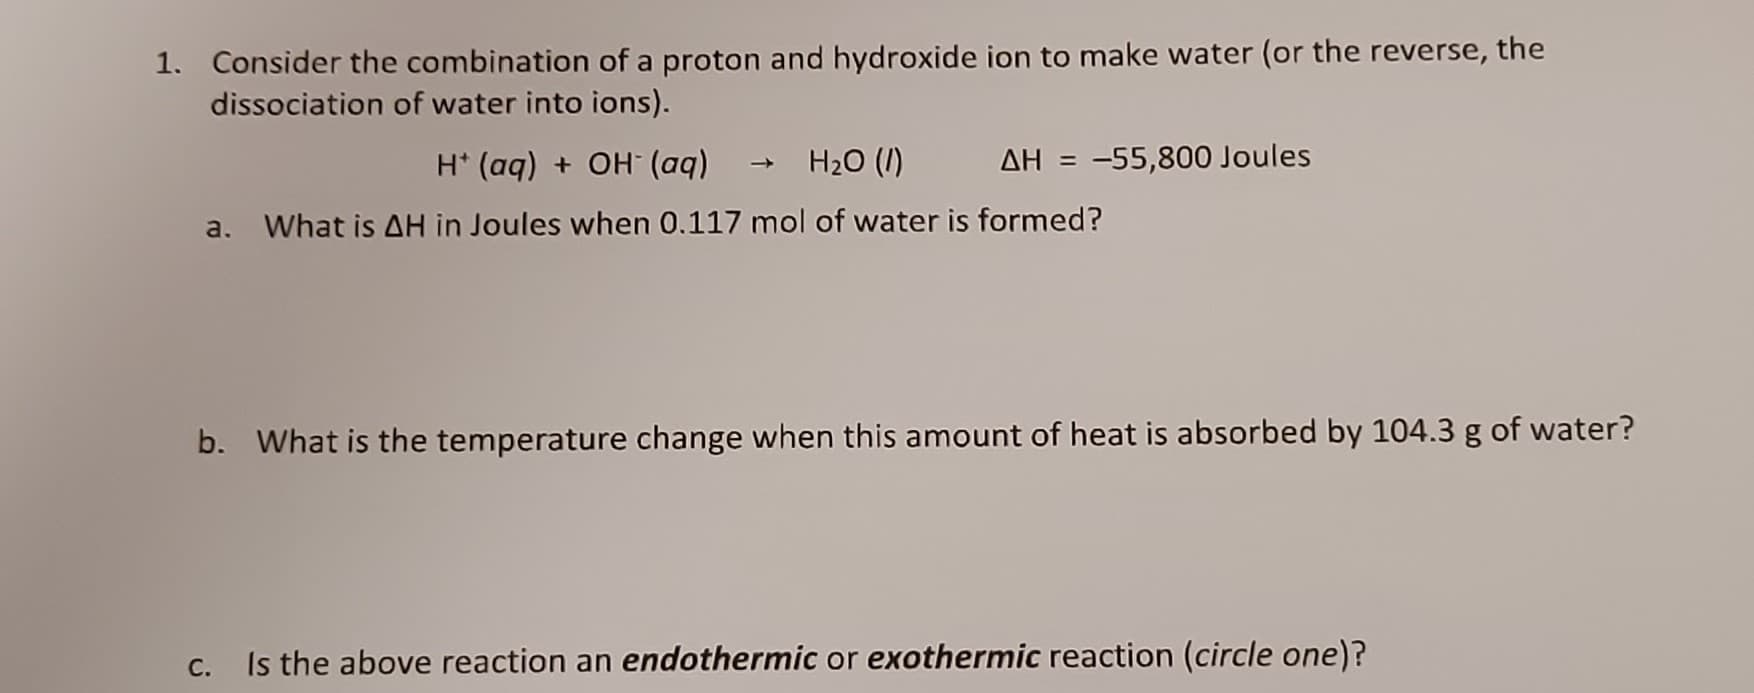 1. Consider the combination of a proton and hydroxide ion to make water (or the reverse, the
dissociation of water into ions).
(bp) HO + (bp) ,H
H20 (I)
AH = -55,800 Joules
a.
What is AH in Joules when 0.117 mol of water is formed?
b. What is the temperature change when this amount of heat is absorbed by 104.3 g of water?
С.
Is the above reaction an endothermic or exothermic reaction (circle one)?
